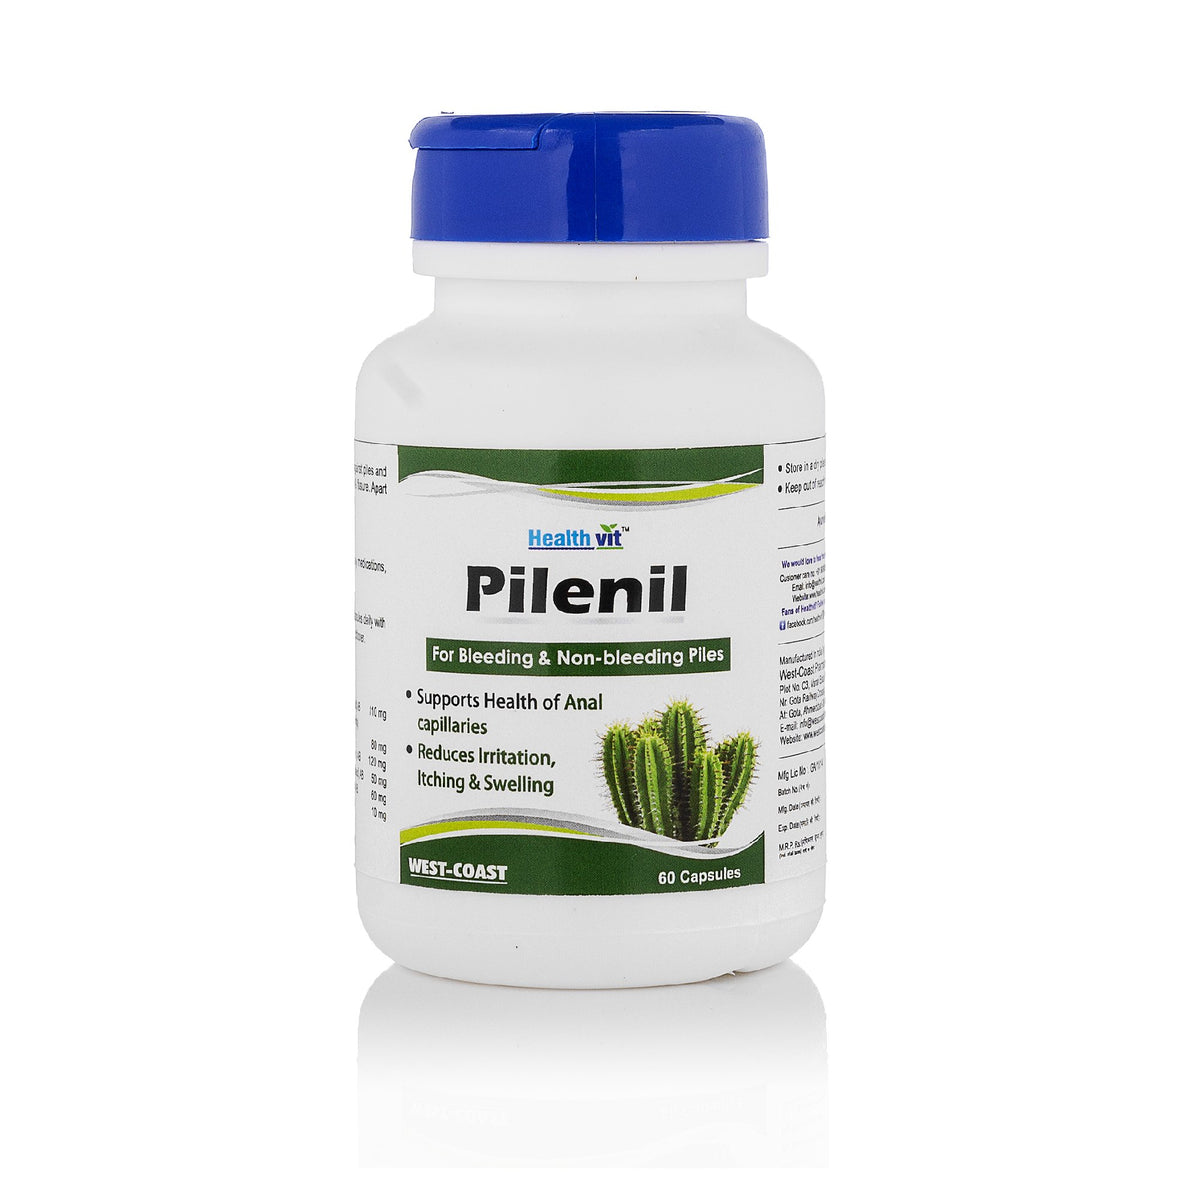 Healthvit Pilenil For Bleeding & Non-bleeding Piles | Reduces Irritation, Itching & Swelling | Supports Health of Anal capillaries | For Men & Women | 60 Capsules